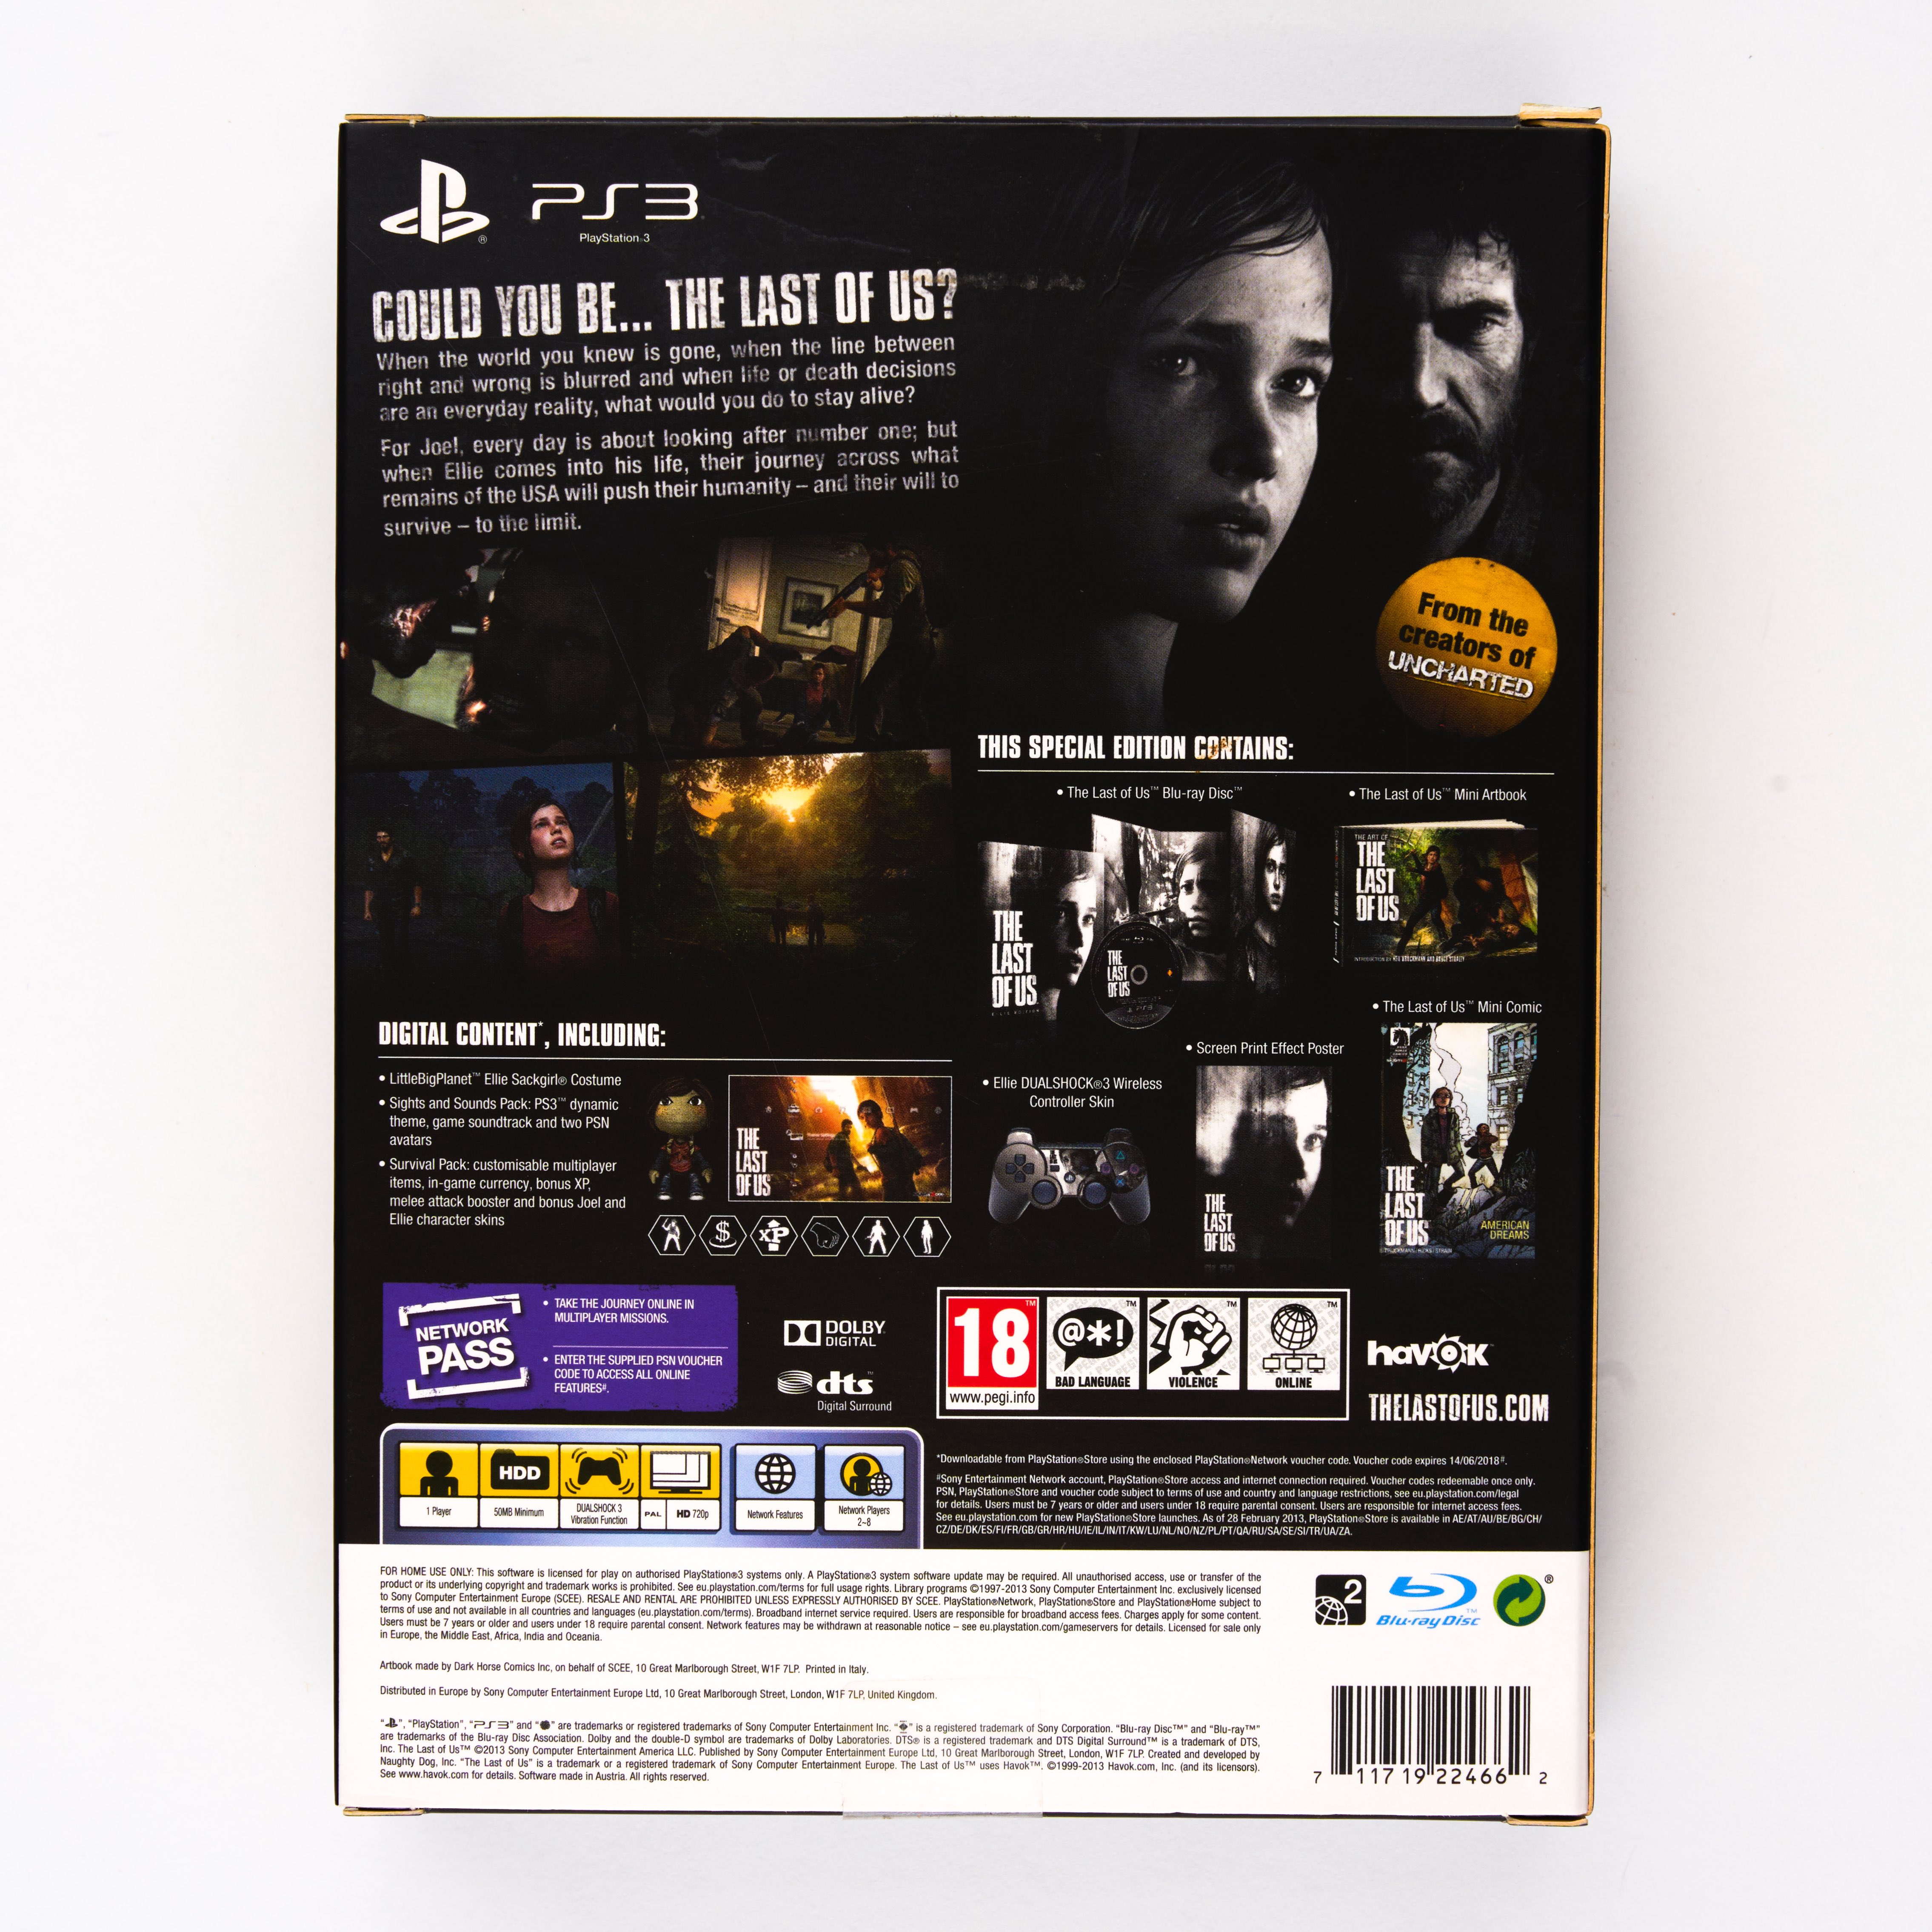 Sony - The Last of Us Ellie Edition PAL - Playstation 3 - Complete In Box - Image 2 of 2